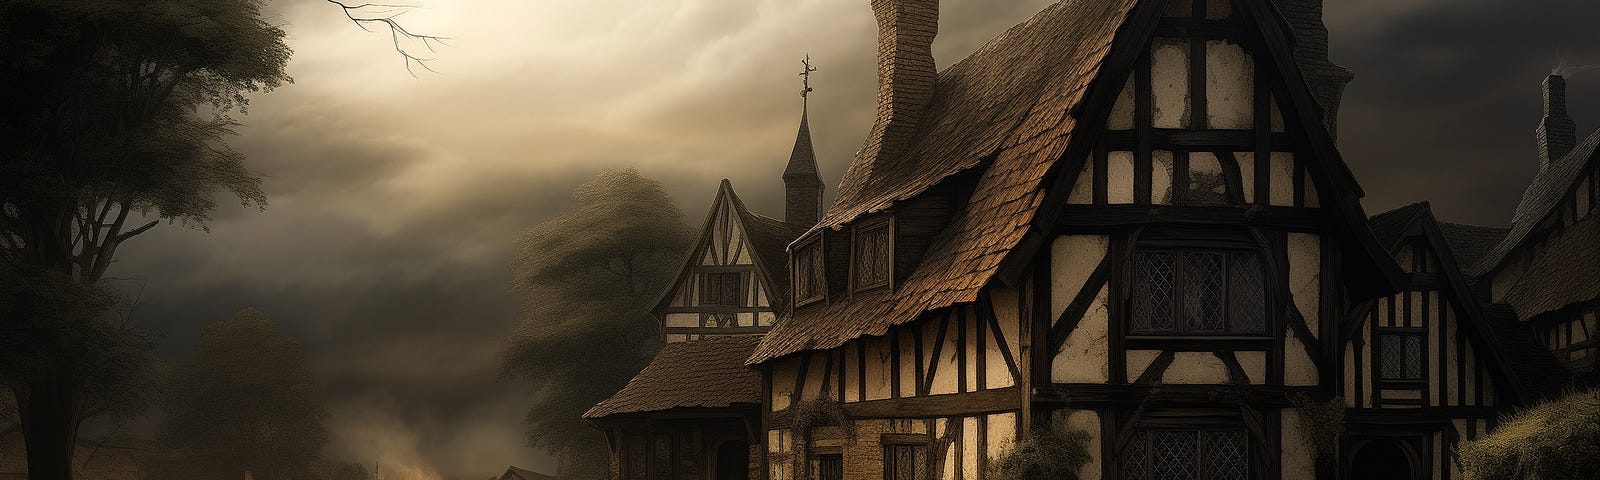 A large half-timbered building in gloomy, misty light, a road in front